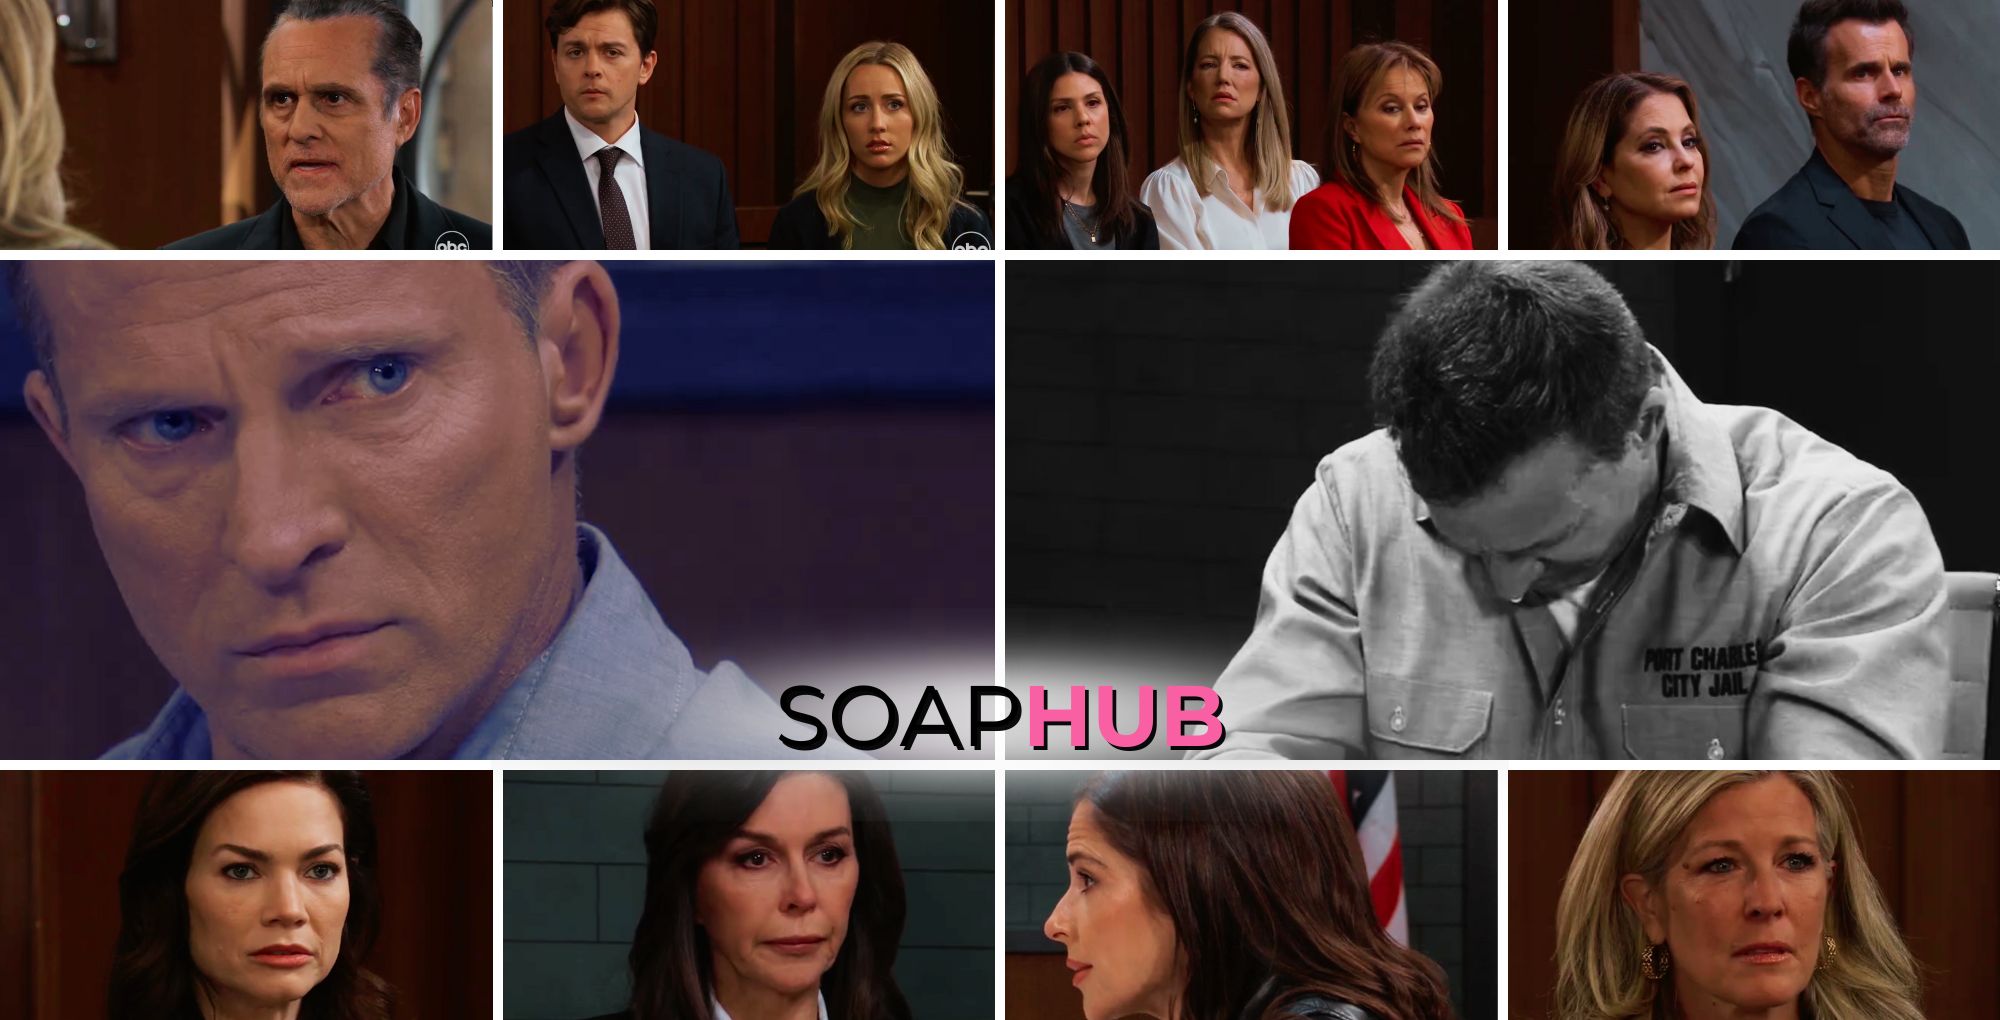 General Hospital spoilers weekly video preview collage for the week of March 25 with the soap hub logo near the bottom of the graphic